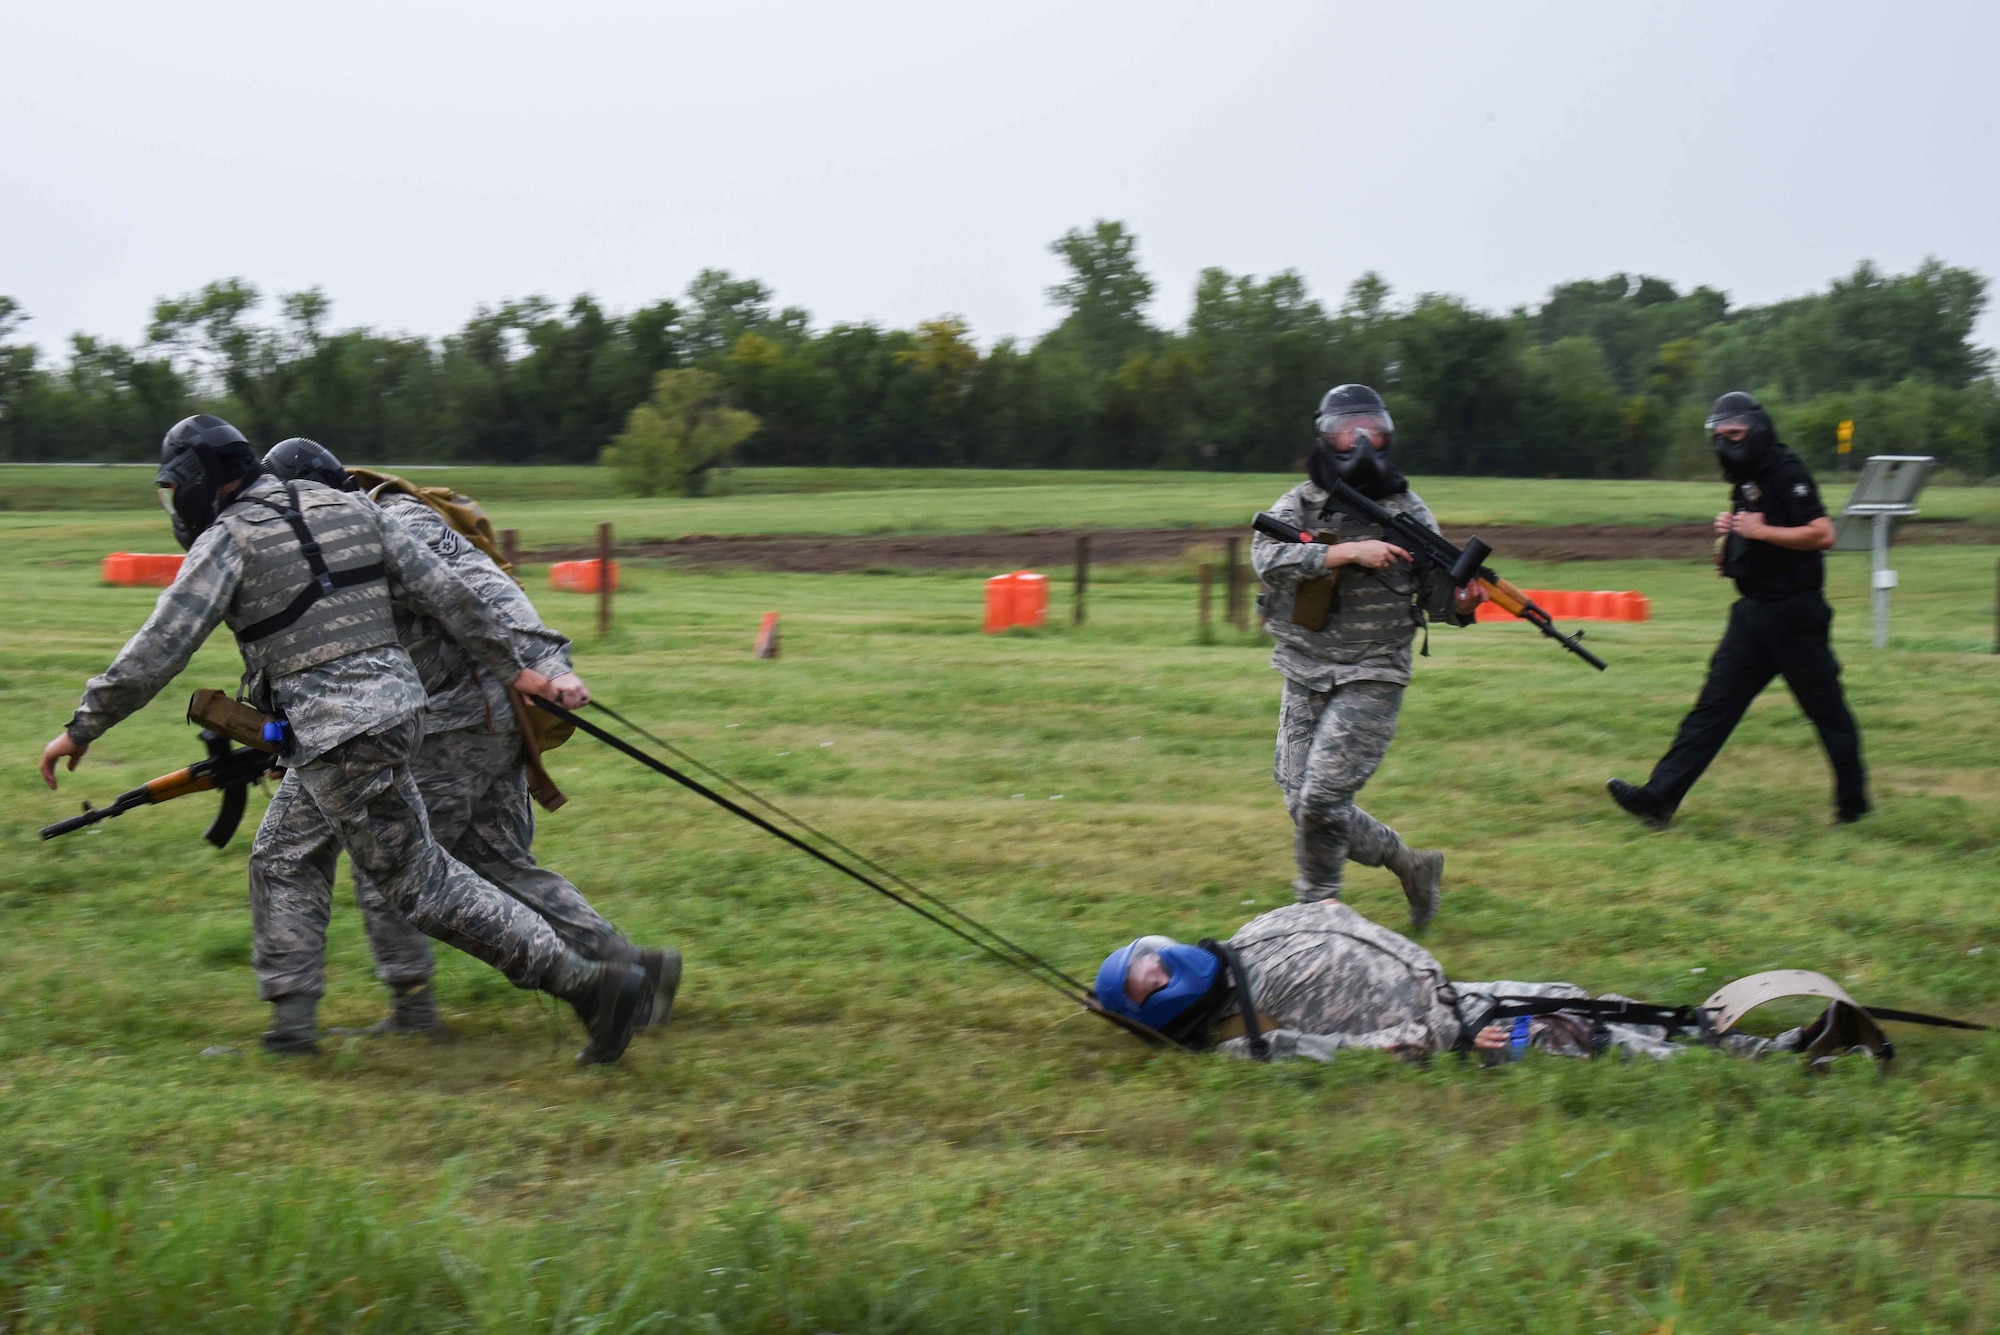 Staff Sgt. Aaron Wooton, 22nd Aerospace Medicine Squadron operational medical technician, and Airman 1st Class Anthony Thomason 22nd Healthcare Operation Squadron medical technician, drag Airman 1st Class Dylan Nealy 22nd HCOS health services management apprentice, to safety during an Emergency Medical Technician Rodeo Aug. 22, 2019, at McConnell Air Force Base, Kan. The medics practiced Tactical Combat Casualty Care tactics to effectively recover the Airman and stabilize his simulated injuries. (U.S. Air Force photo by Airman 1st Class Alexi Myrick)